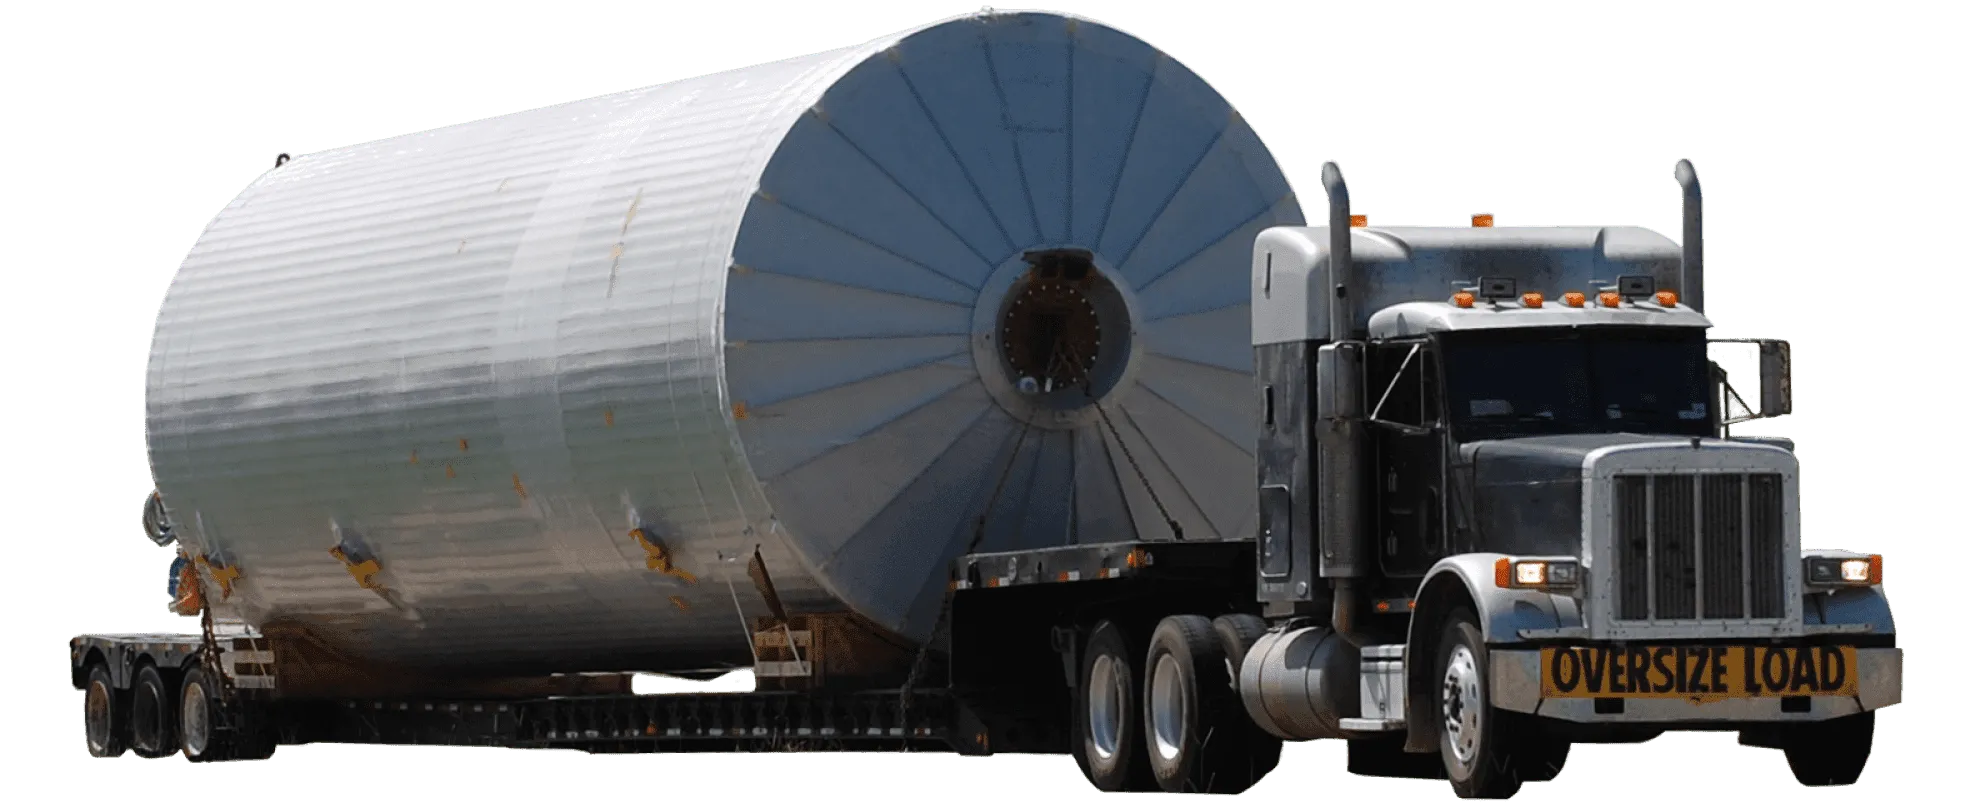 An overdimensional freight truck carrying an extremely oversized load.